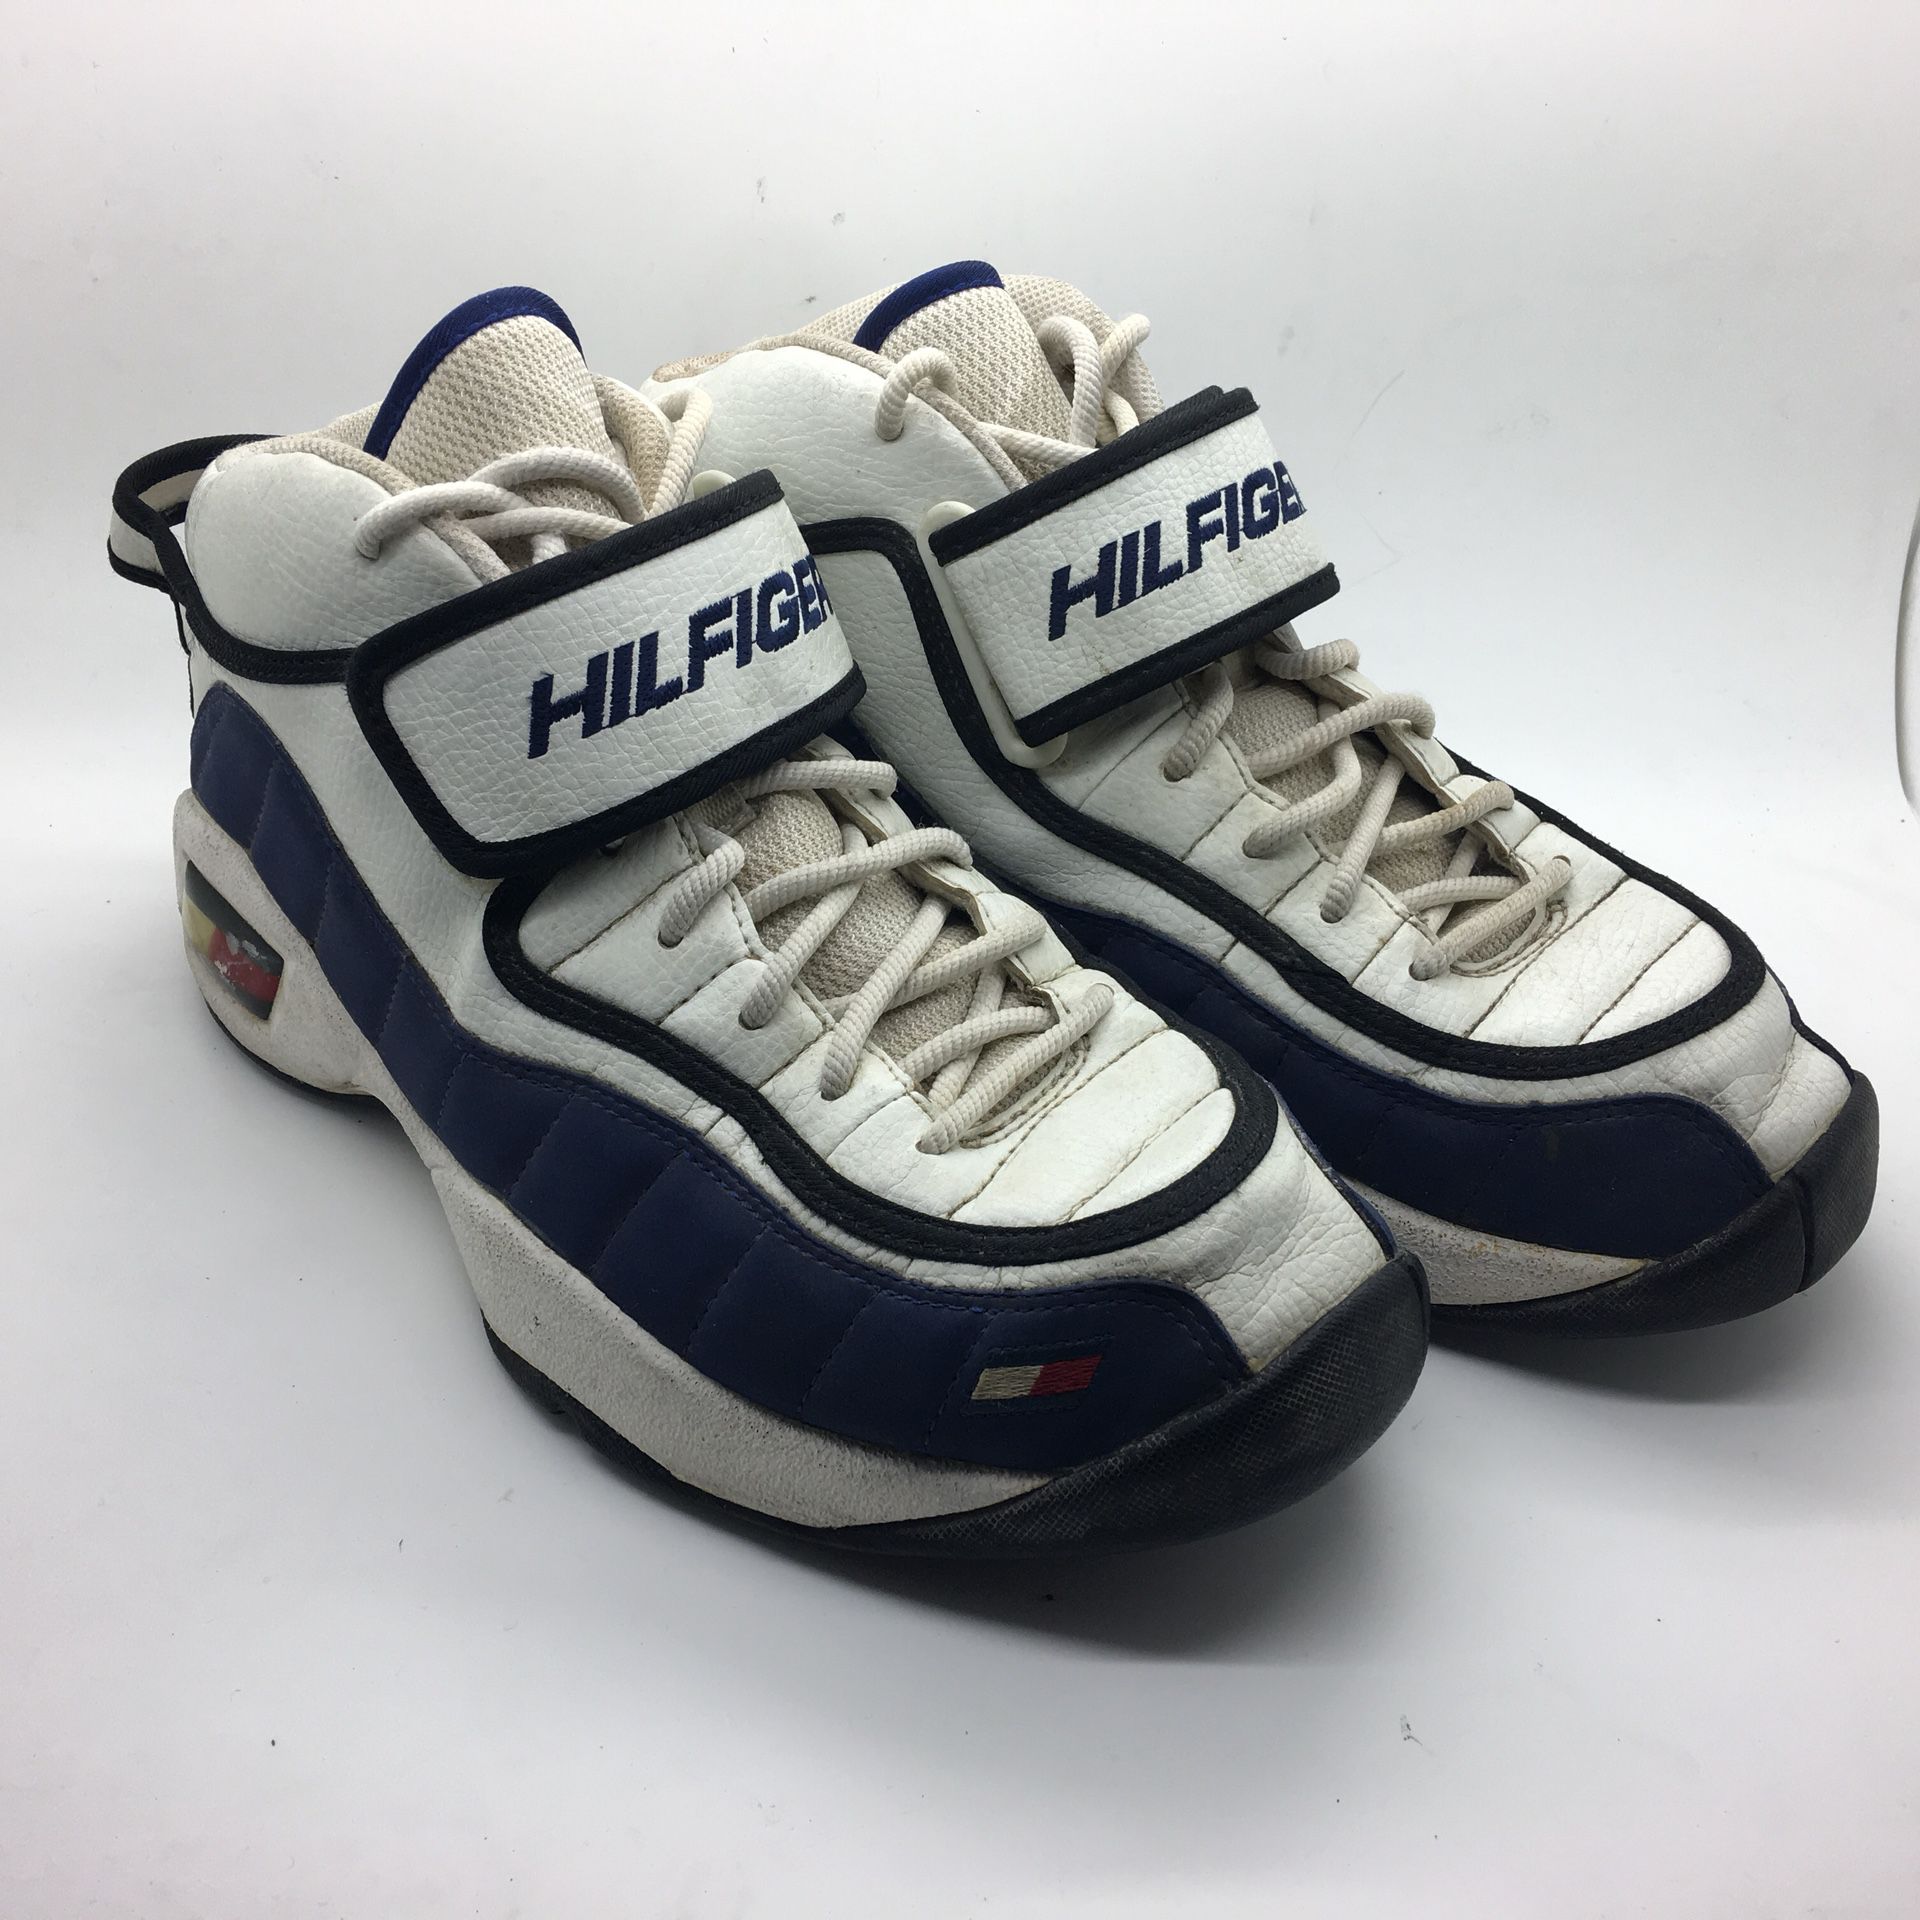 Rare Tommy Hilfiger M71060 Basketball Shoes Mens 10 for Sale in WA - OfferUp